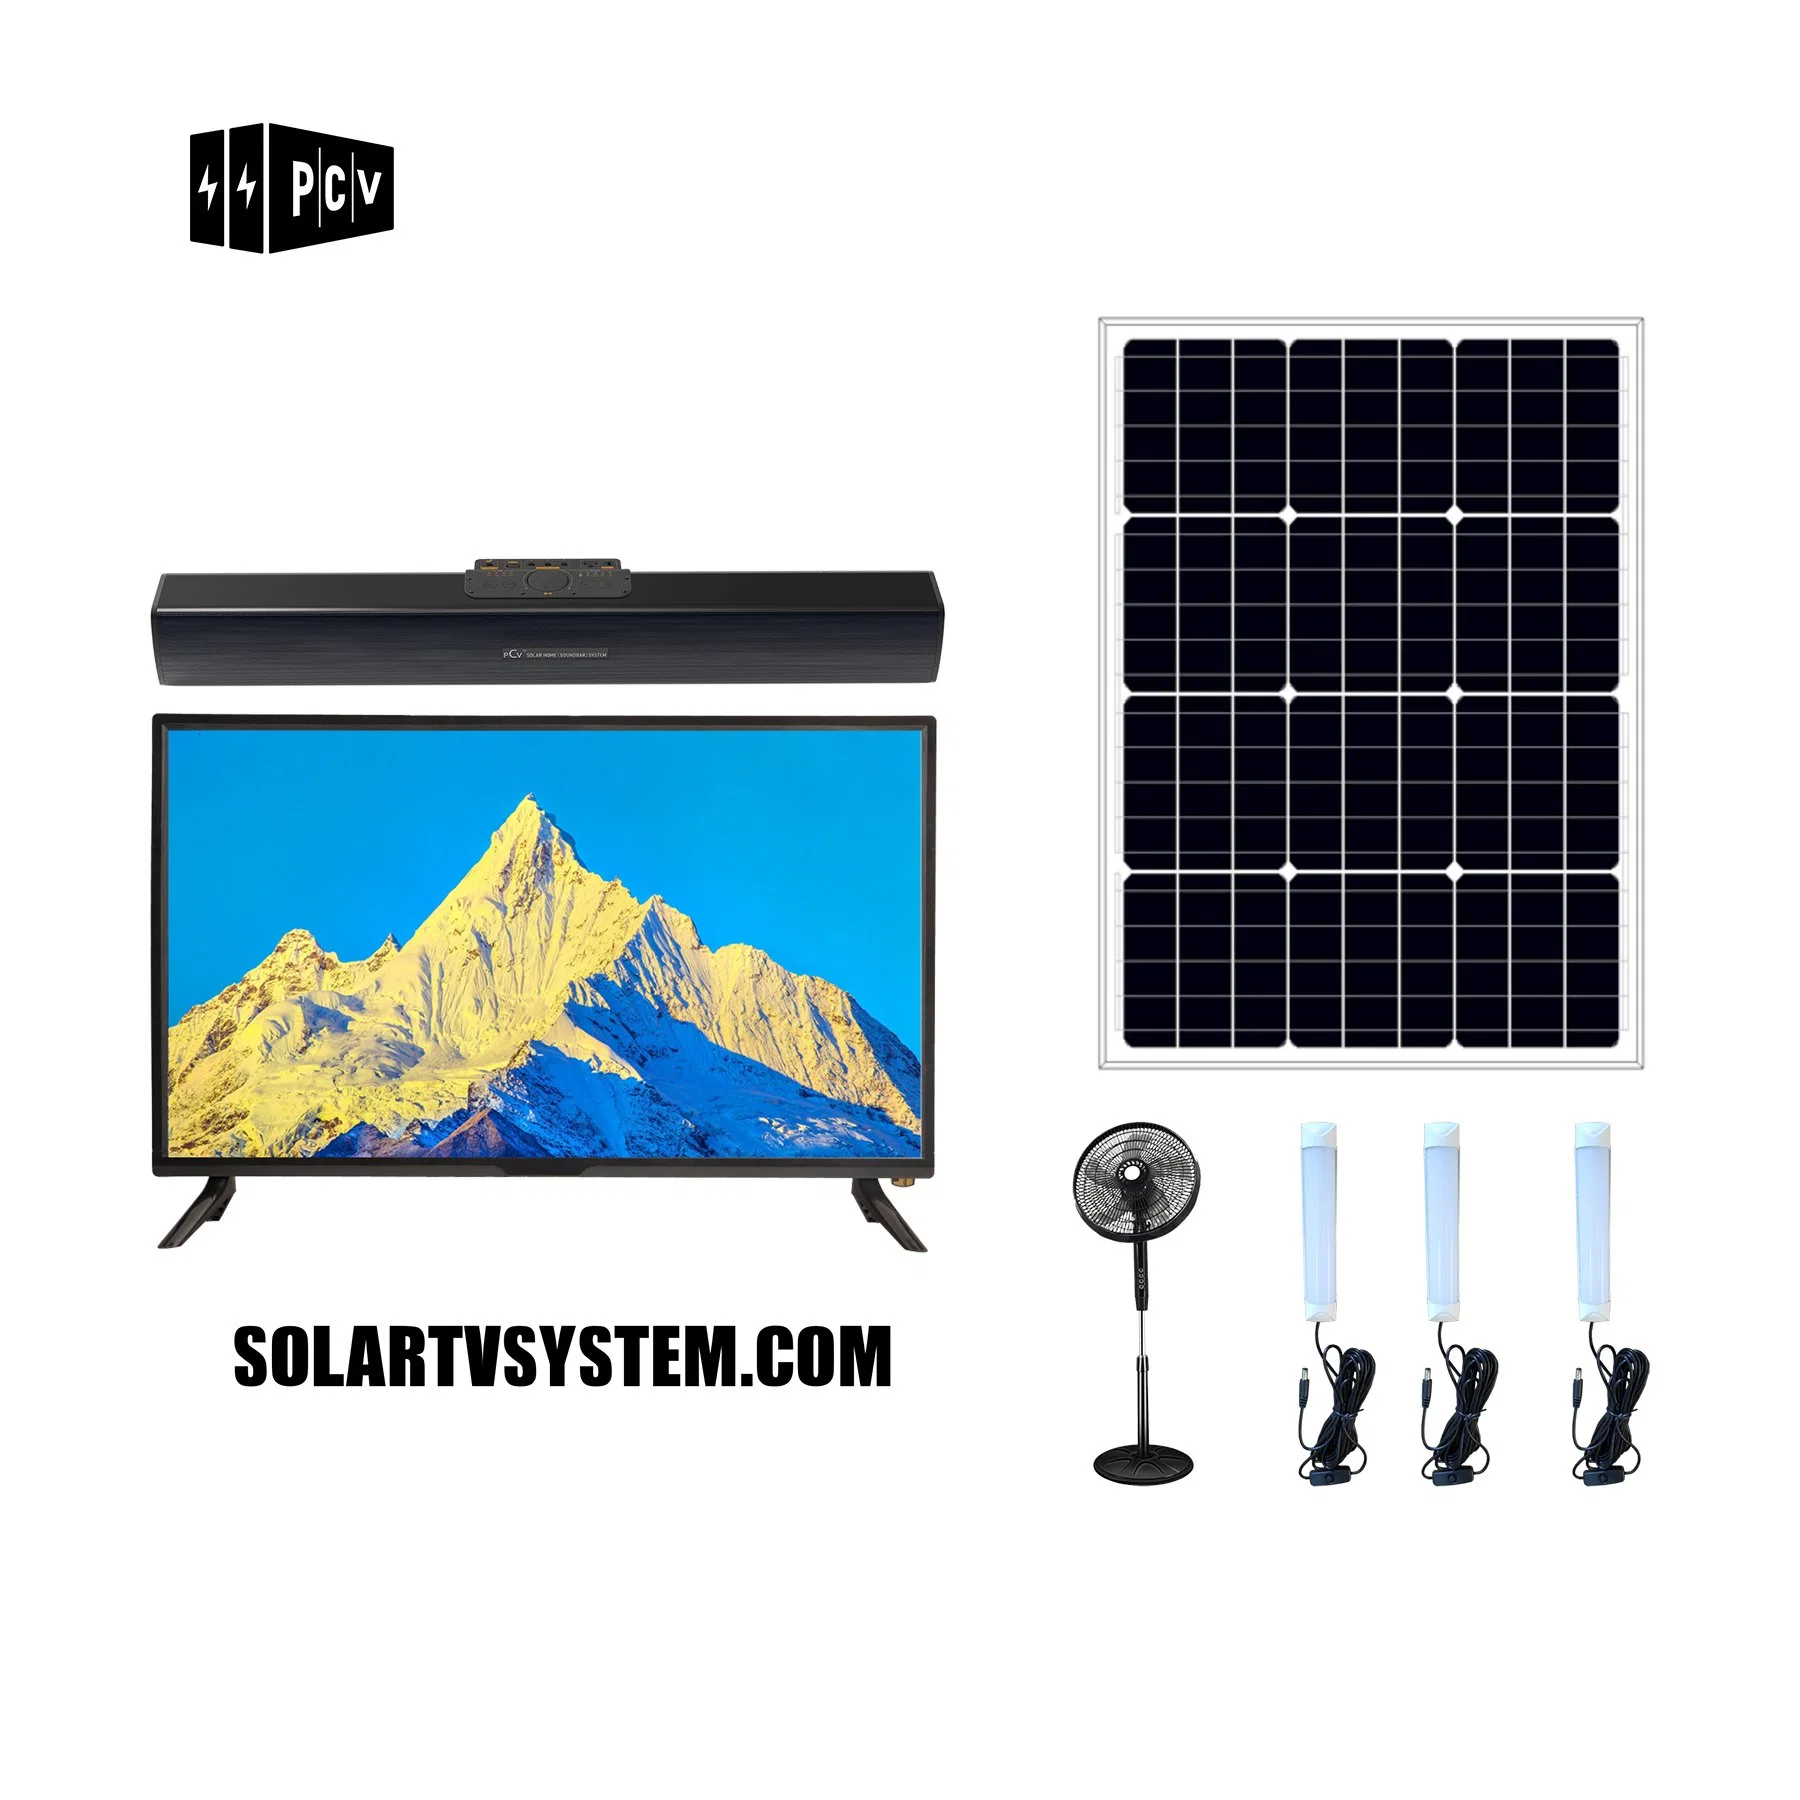 Pcv Best Price Solar Audio & Video Kit Solar TV System for Home Lighting, DC TV and DC Fan